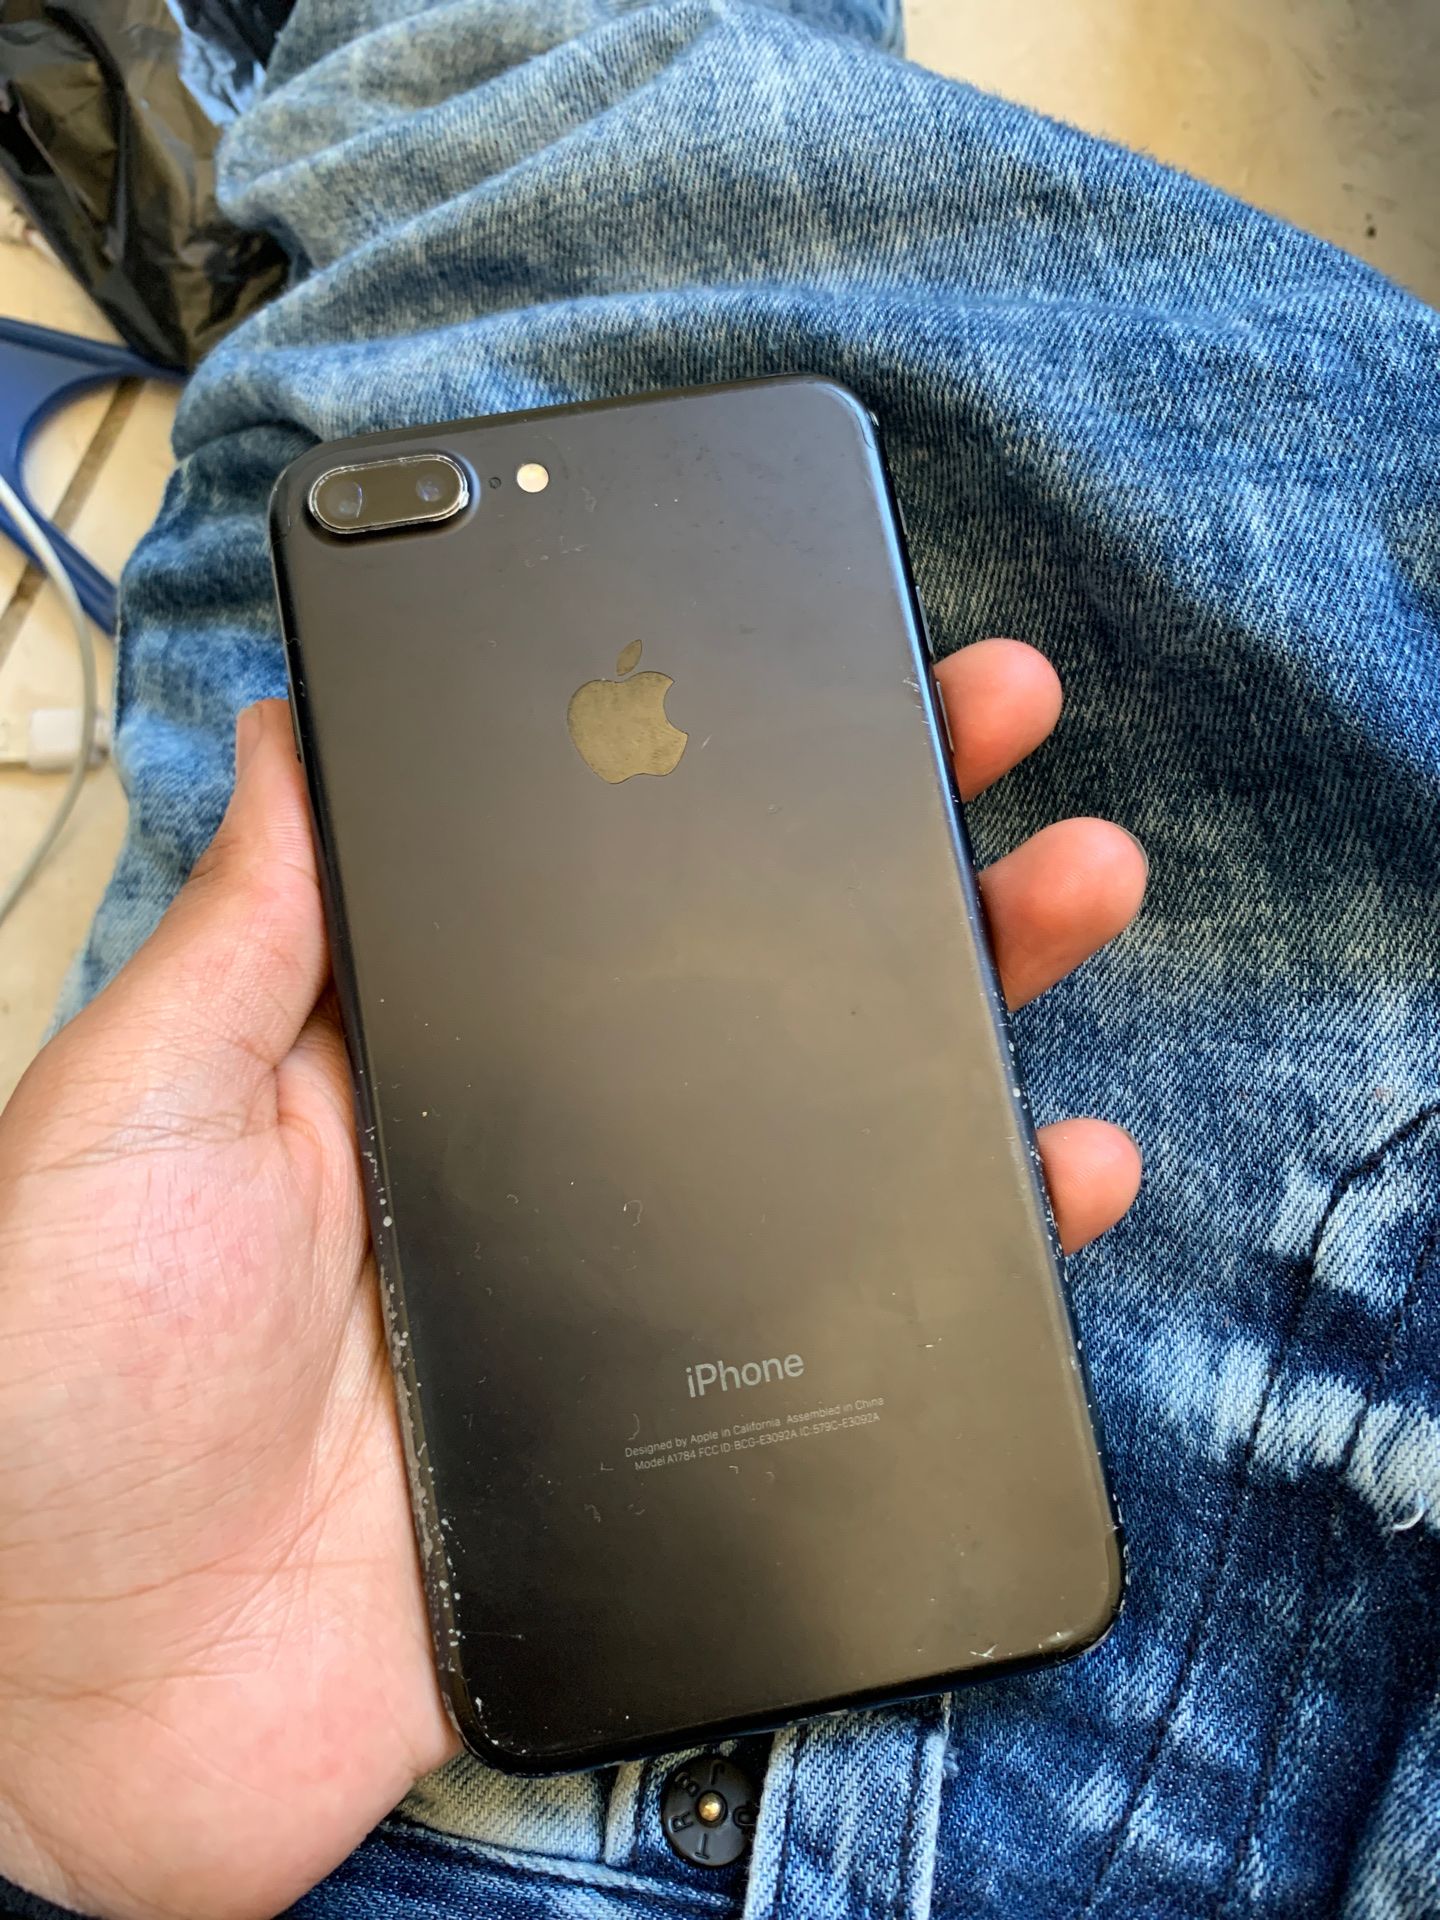 Works Fine just need a new screen iPhone 7+